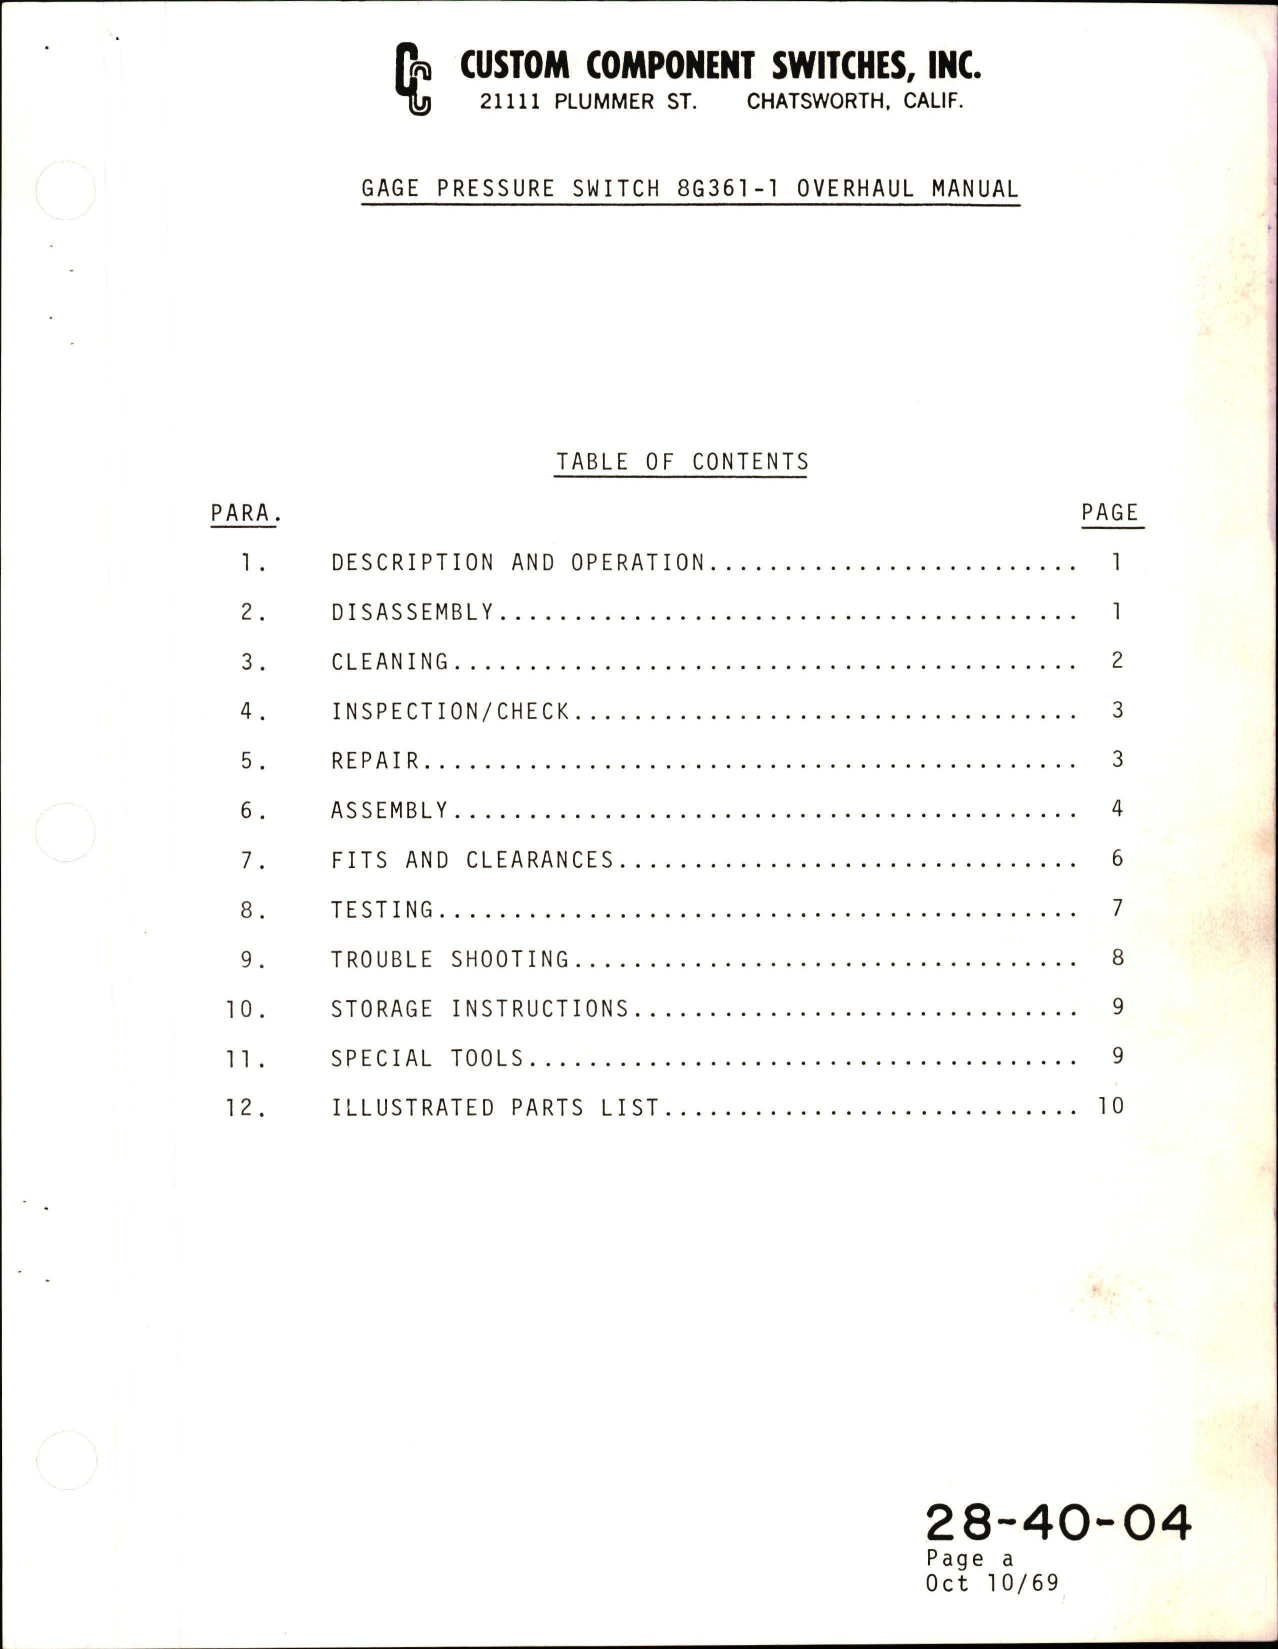 Sample page 1 from AirCorps Library document: Overhaul Manual for Gage Pressure Switch - 8G361-1